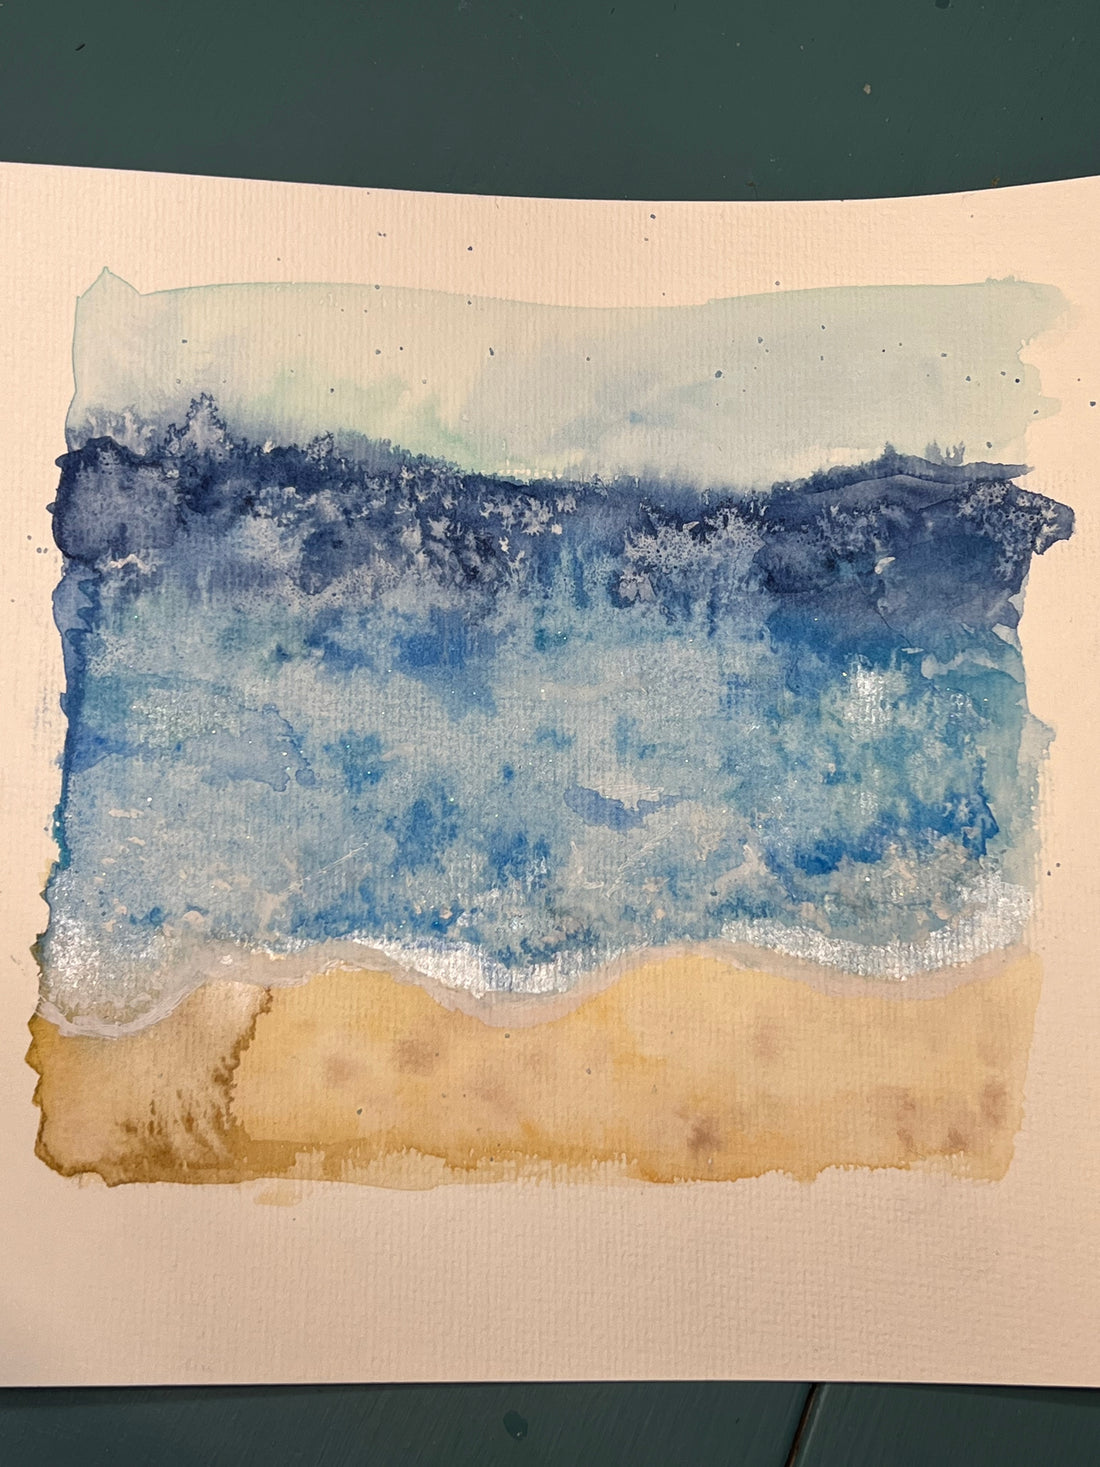 Salt and Watercolor - from guest blogger Courtney Davis